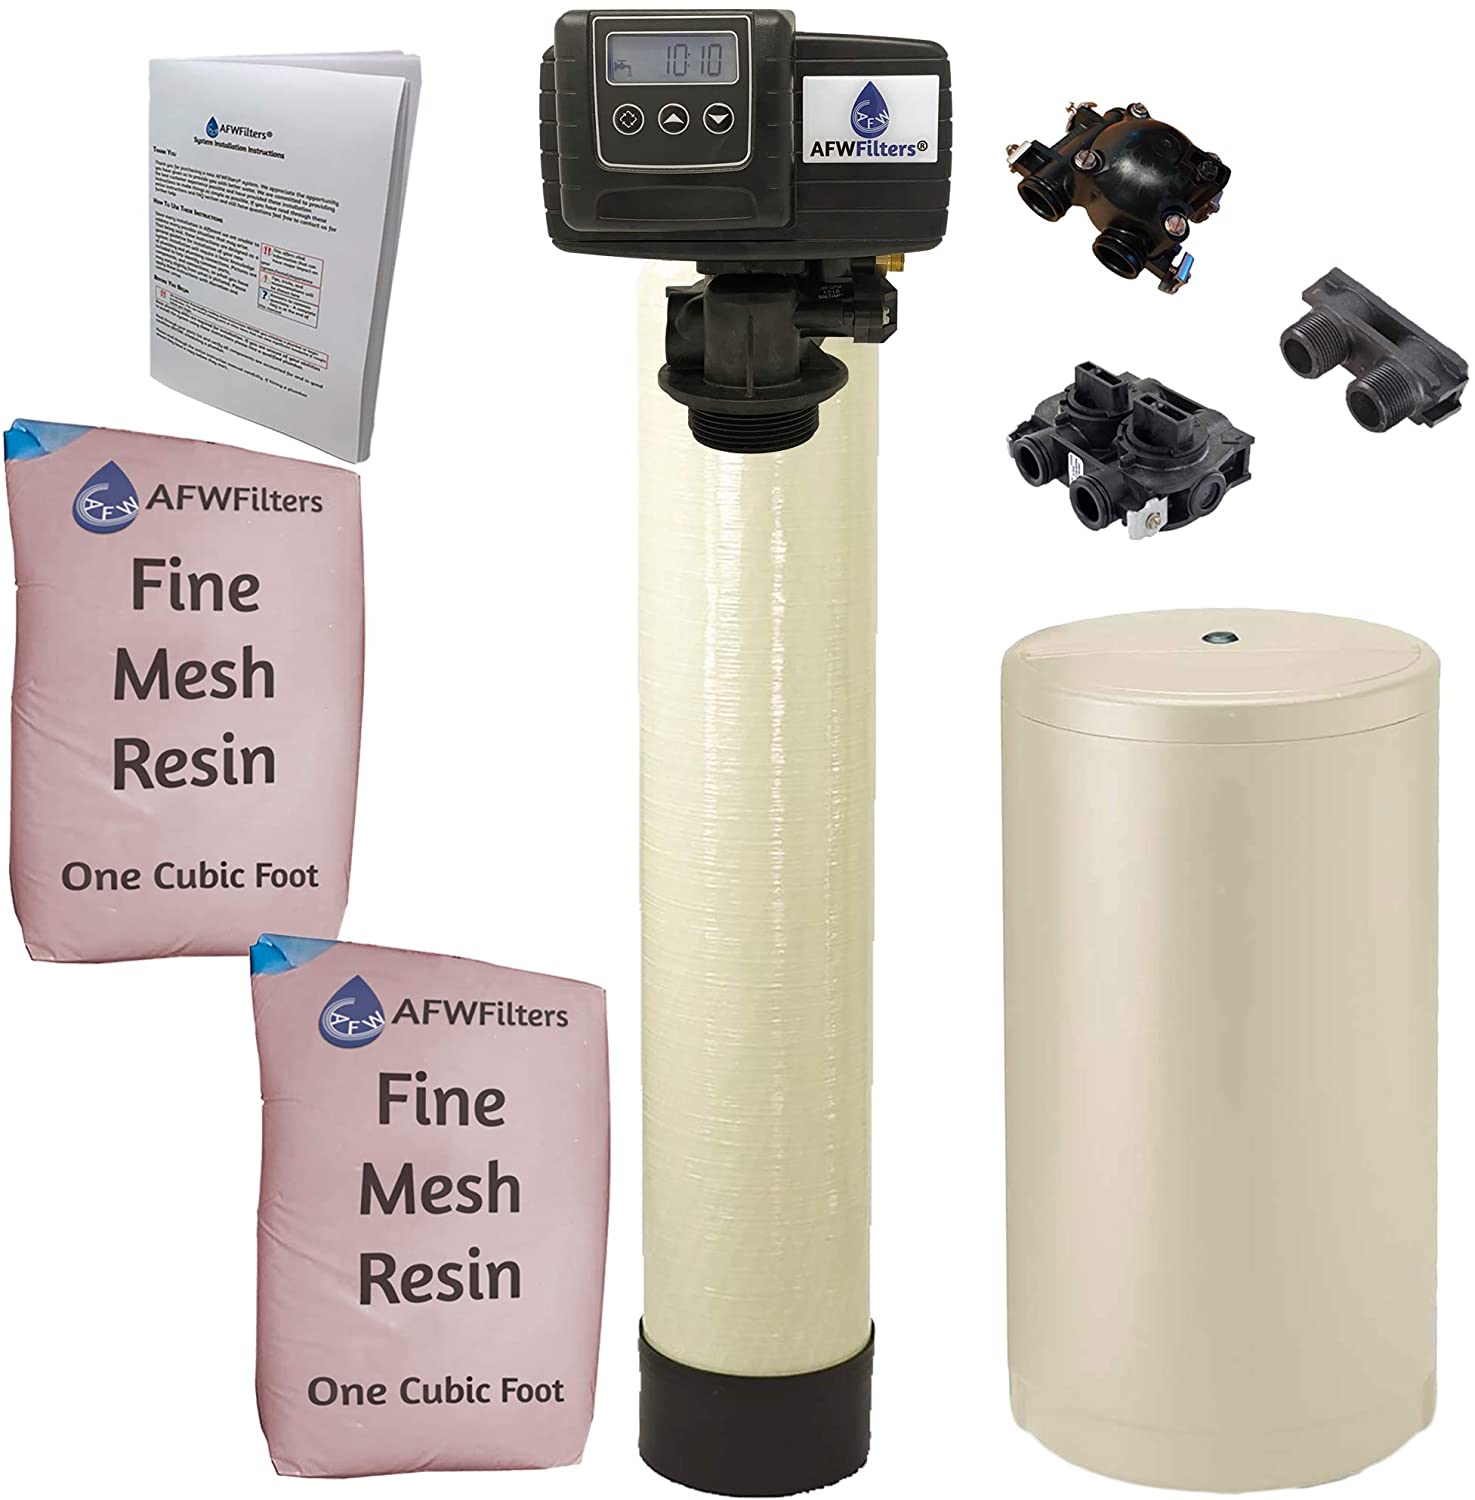 Iron Pro 2 Combination Water Softener for Well Water